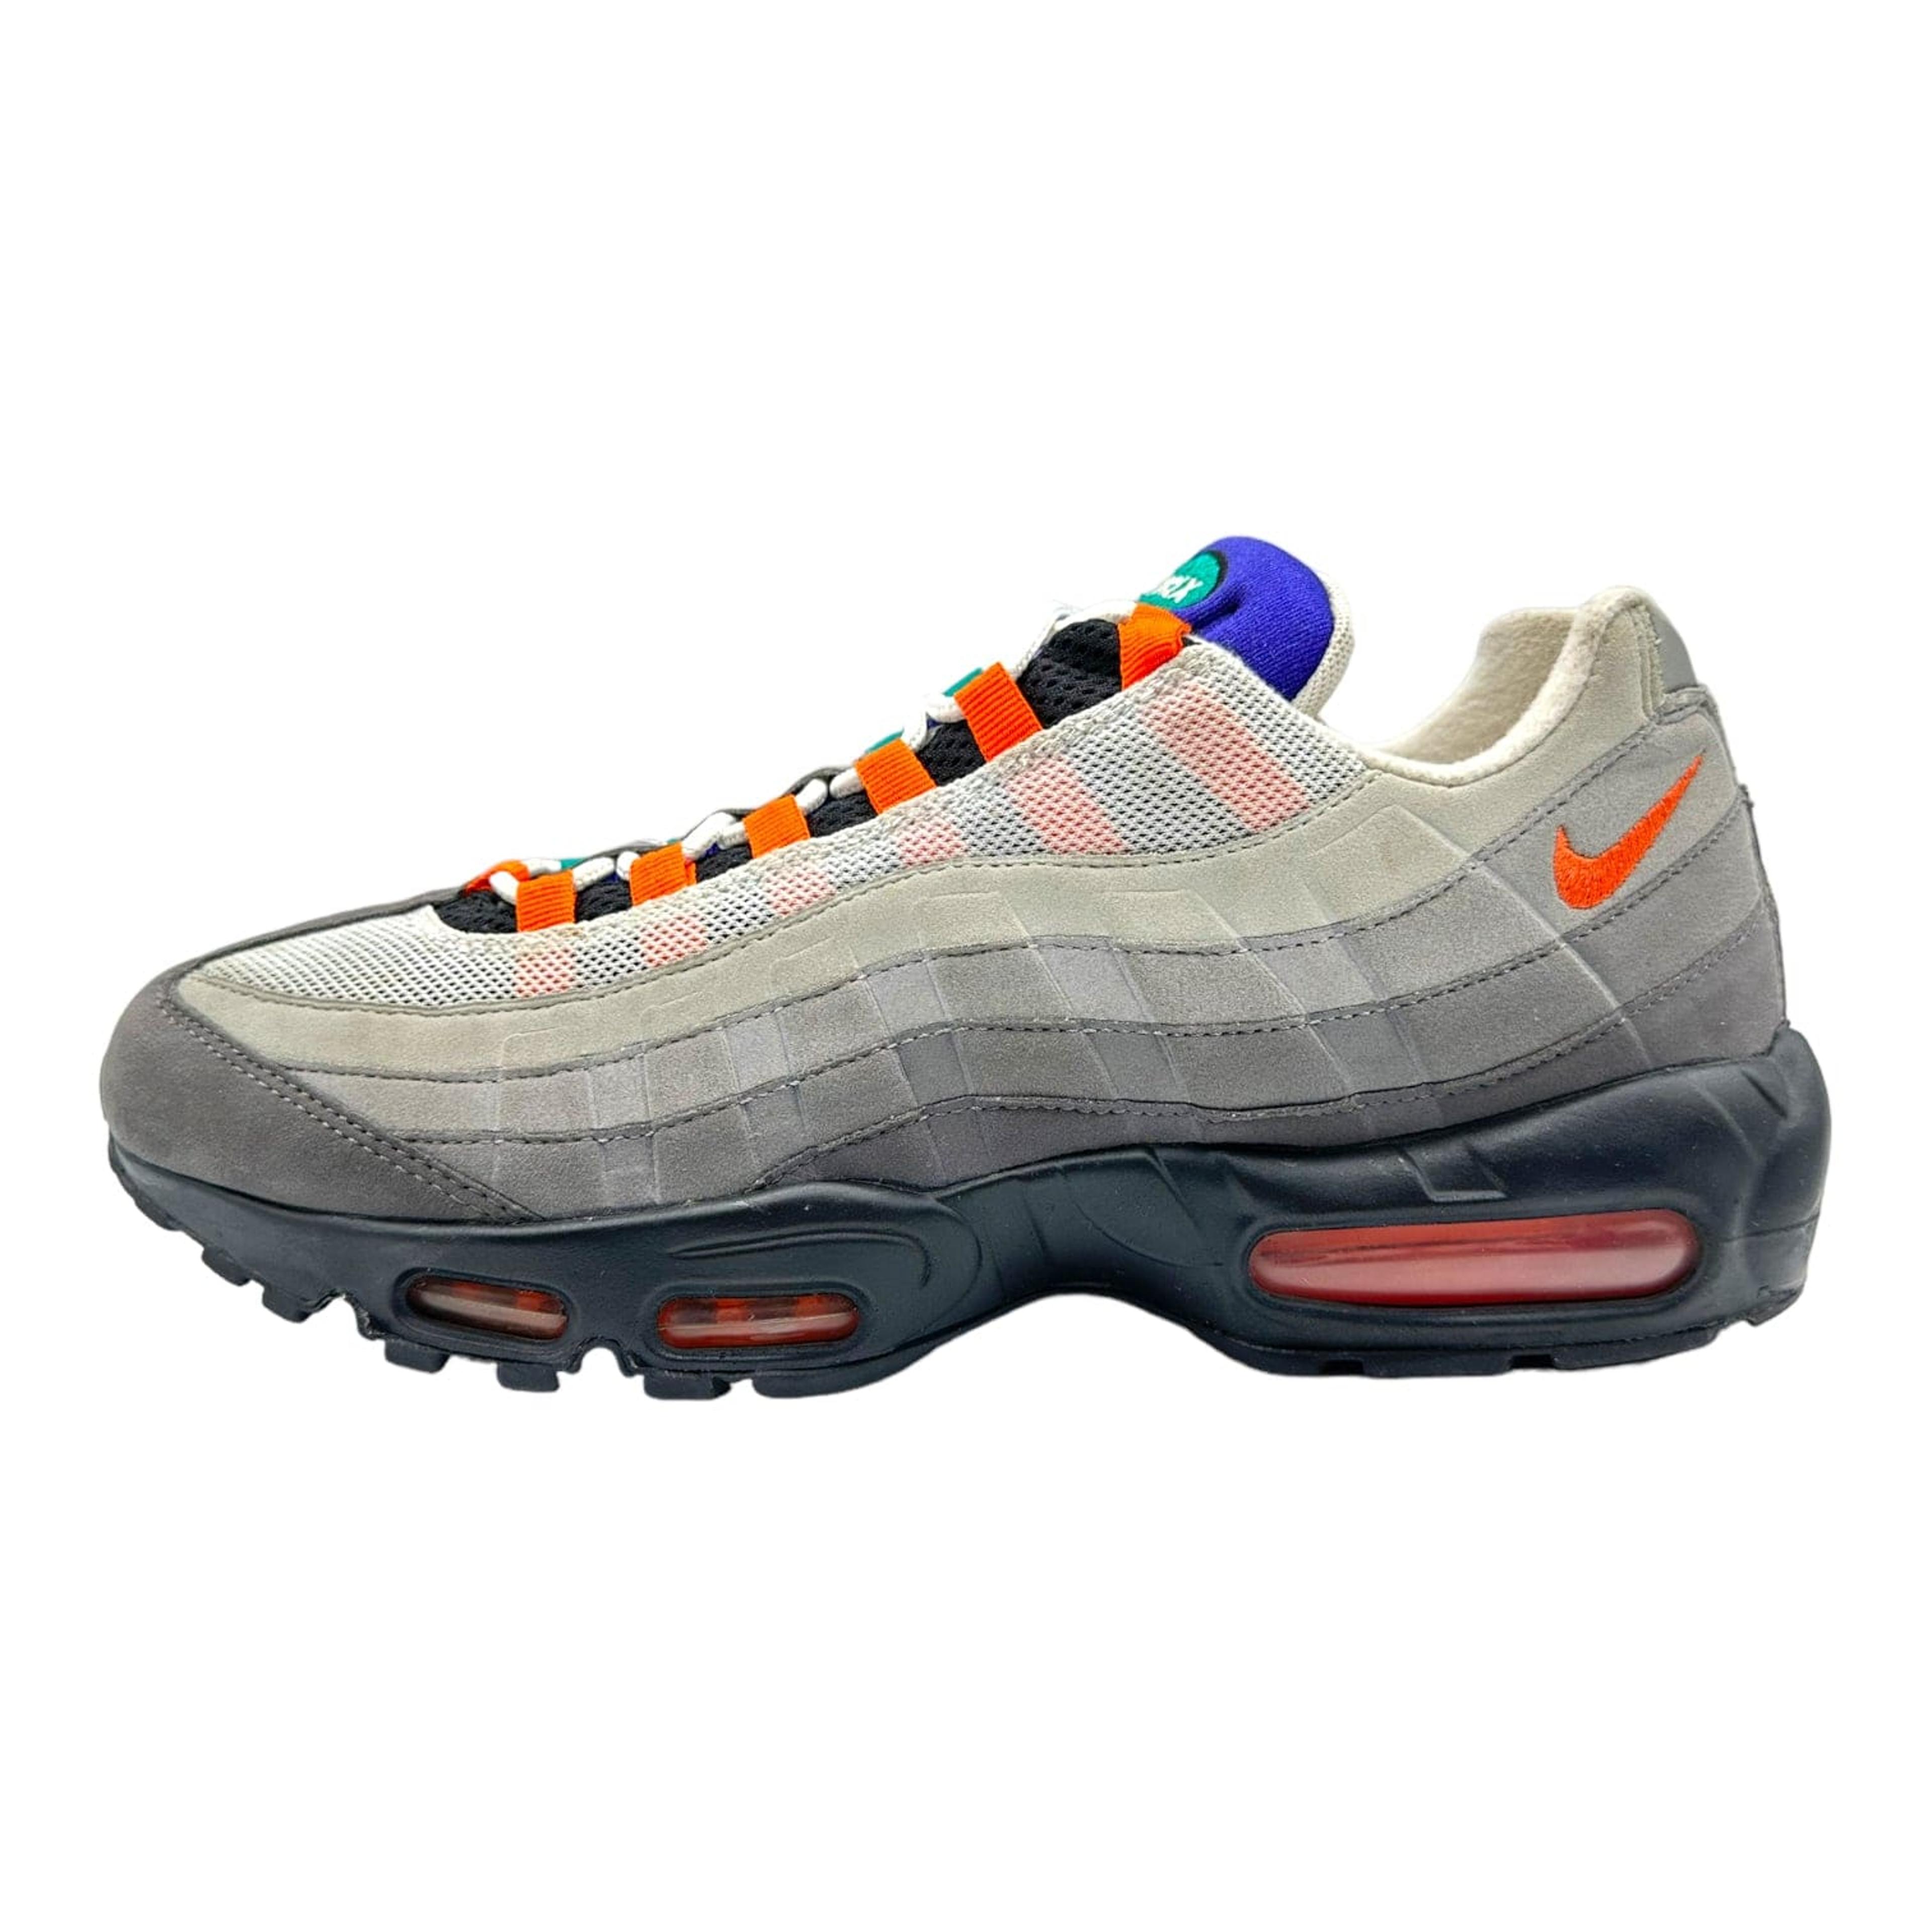 Alternate View 1 of Nike Air Max 95 What the Air Max Pre-Owned